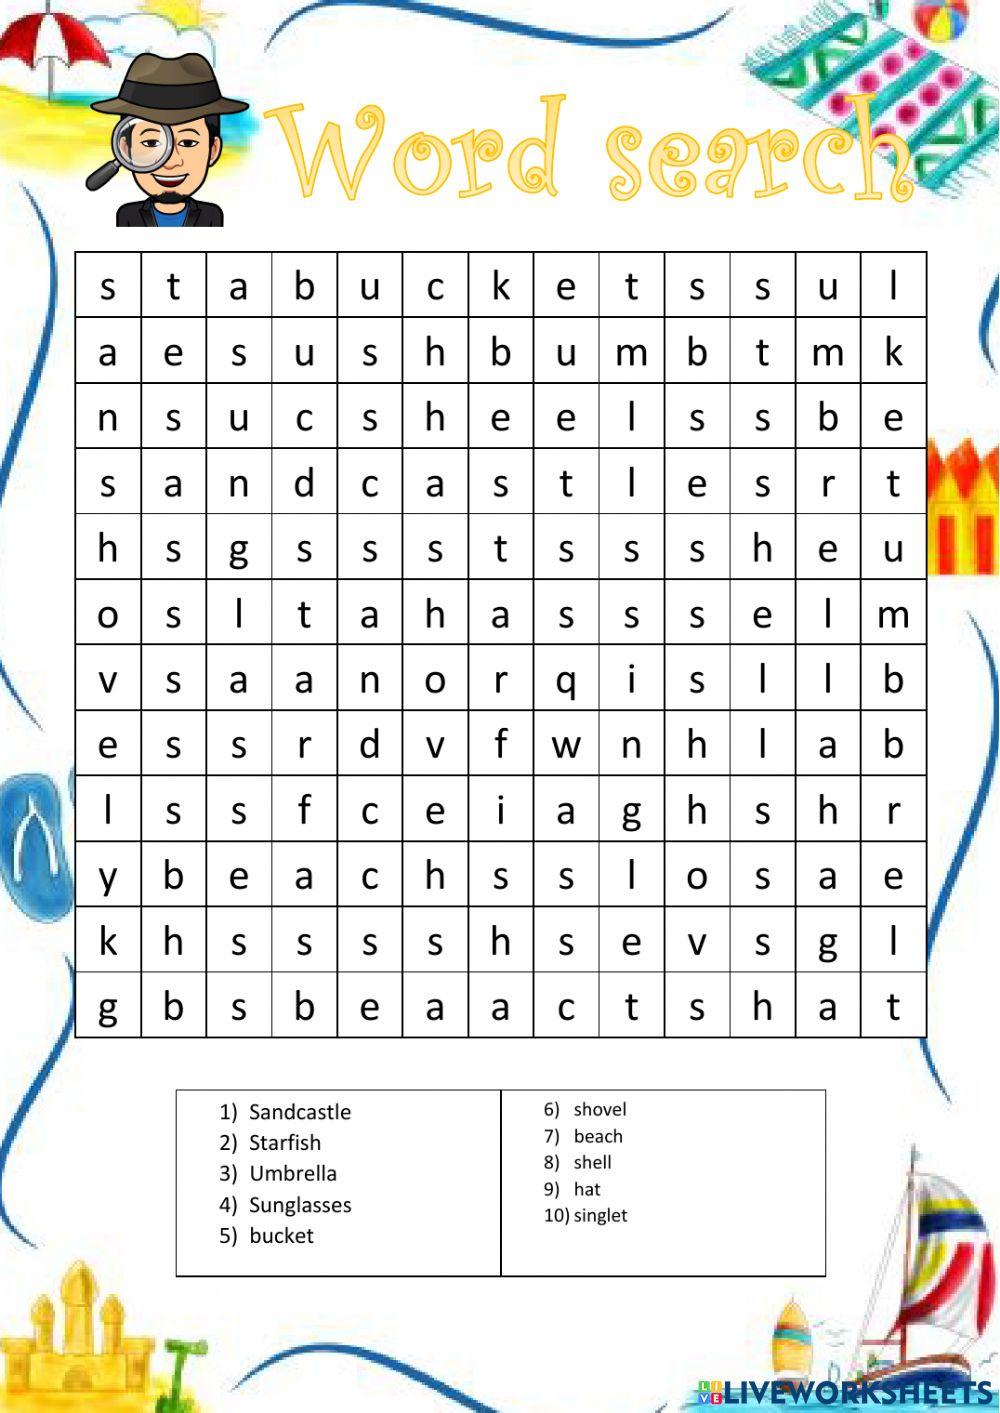 Wordsearch - On the beach